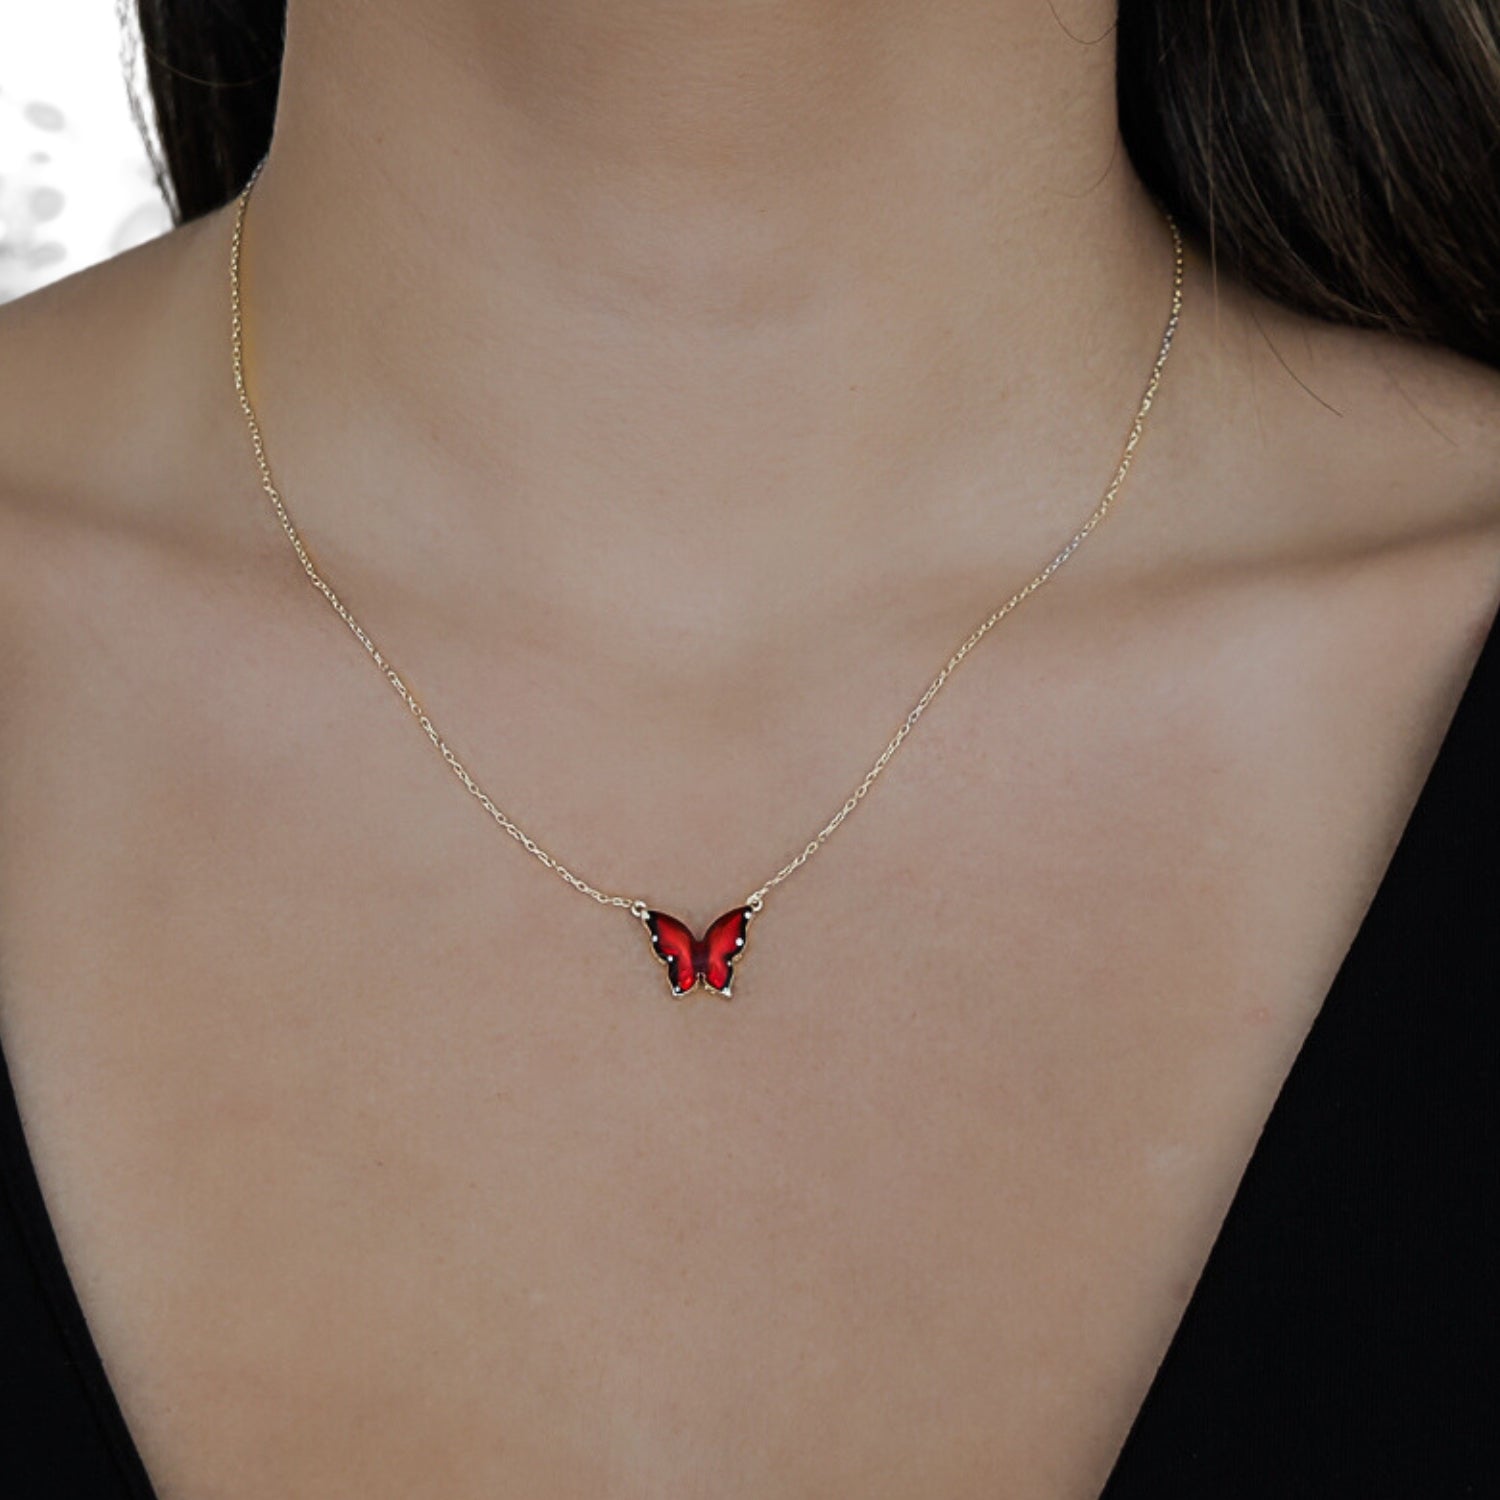 A model wearing the Gold Joy Red Enamel Butterfly Necklace, radiating spirituality and joy.